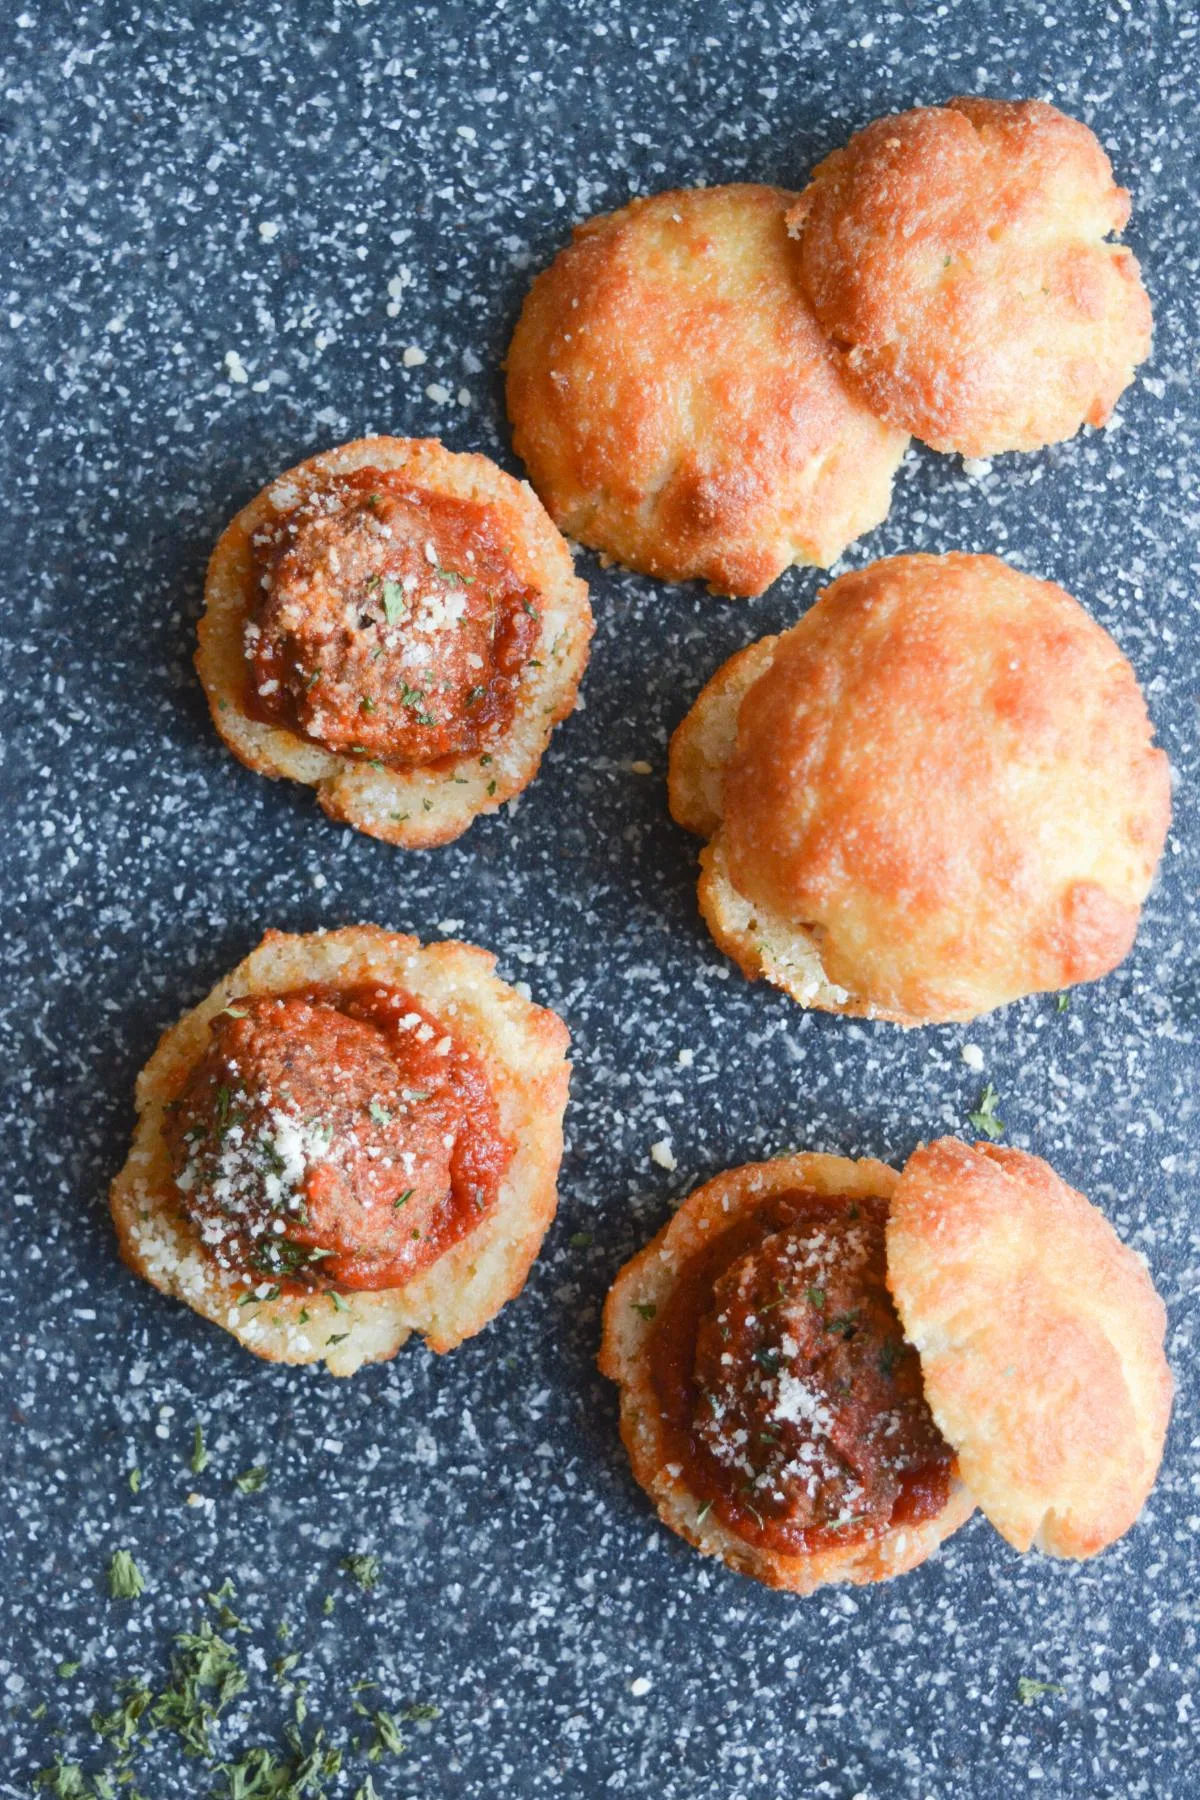 overhead shot of several garlic bread meatball sliders, showing the seasoned meatballs covered in parmesan cheese